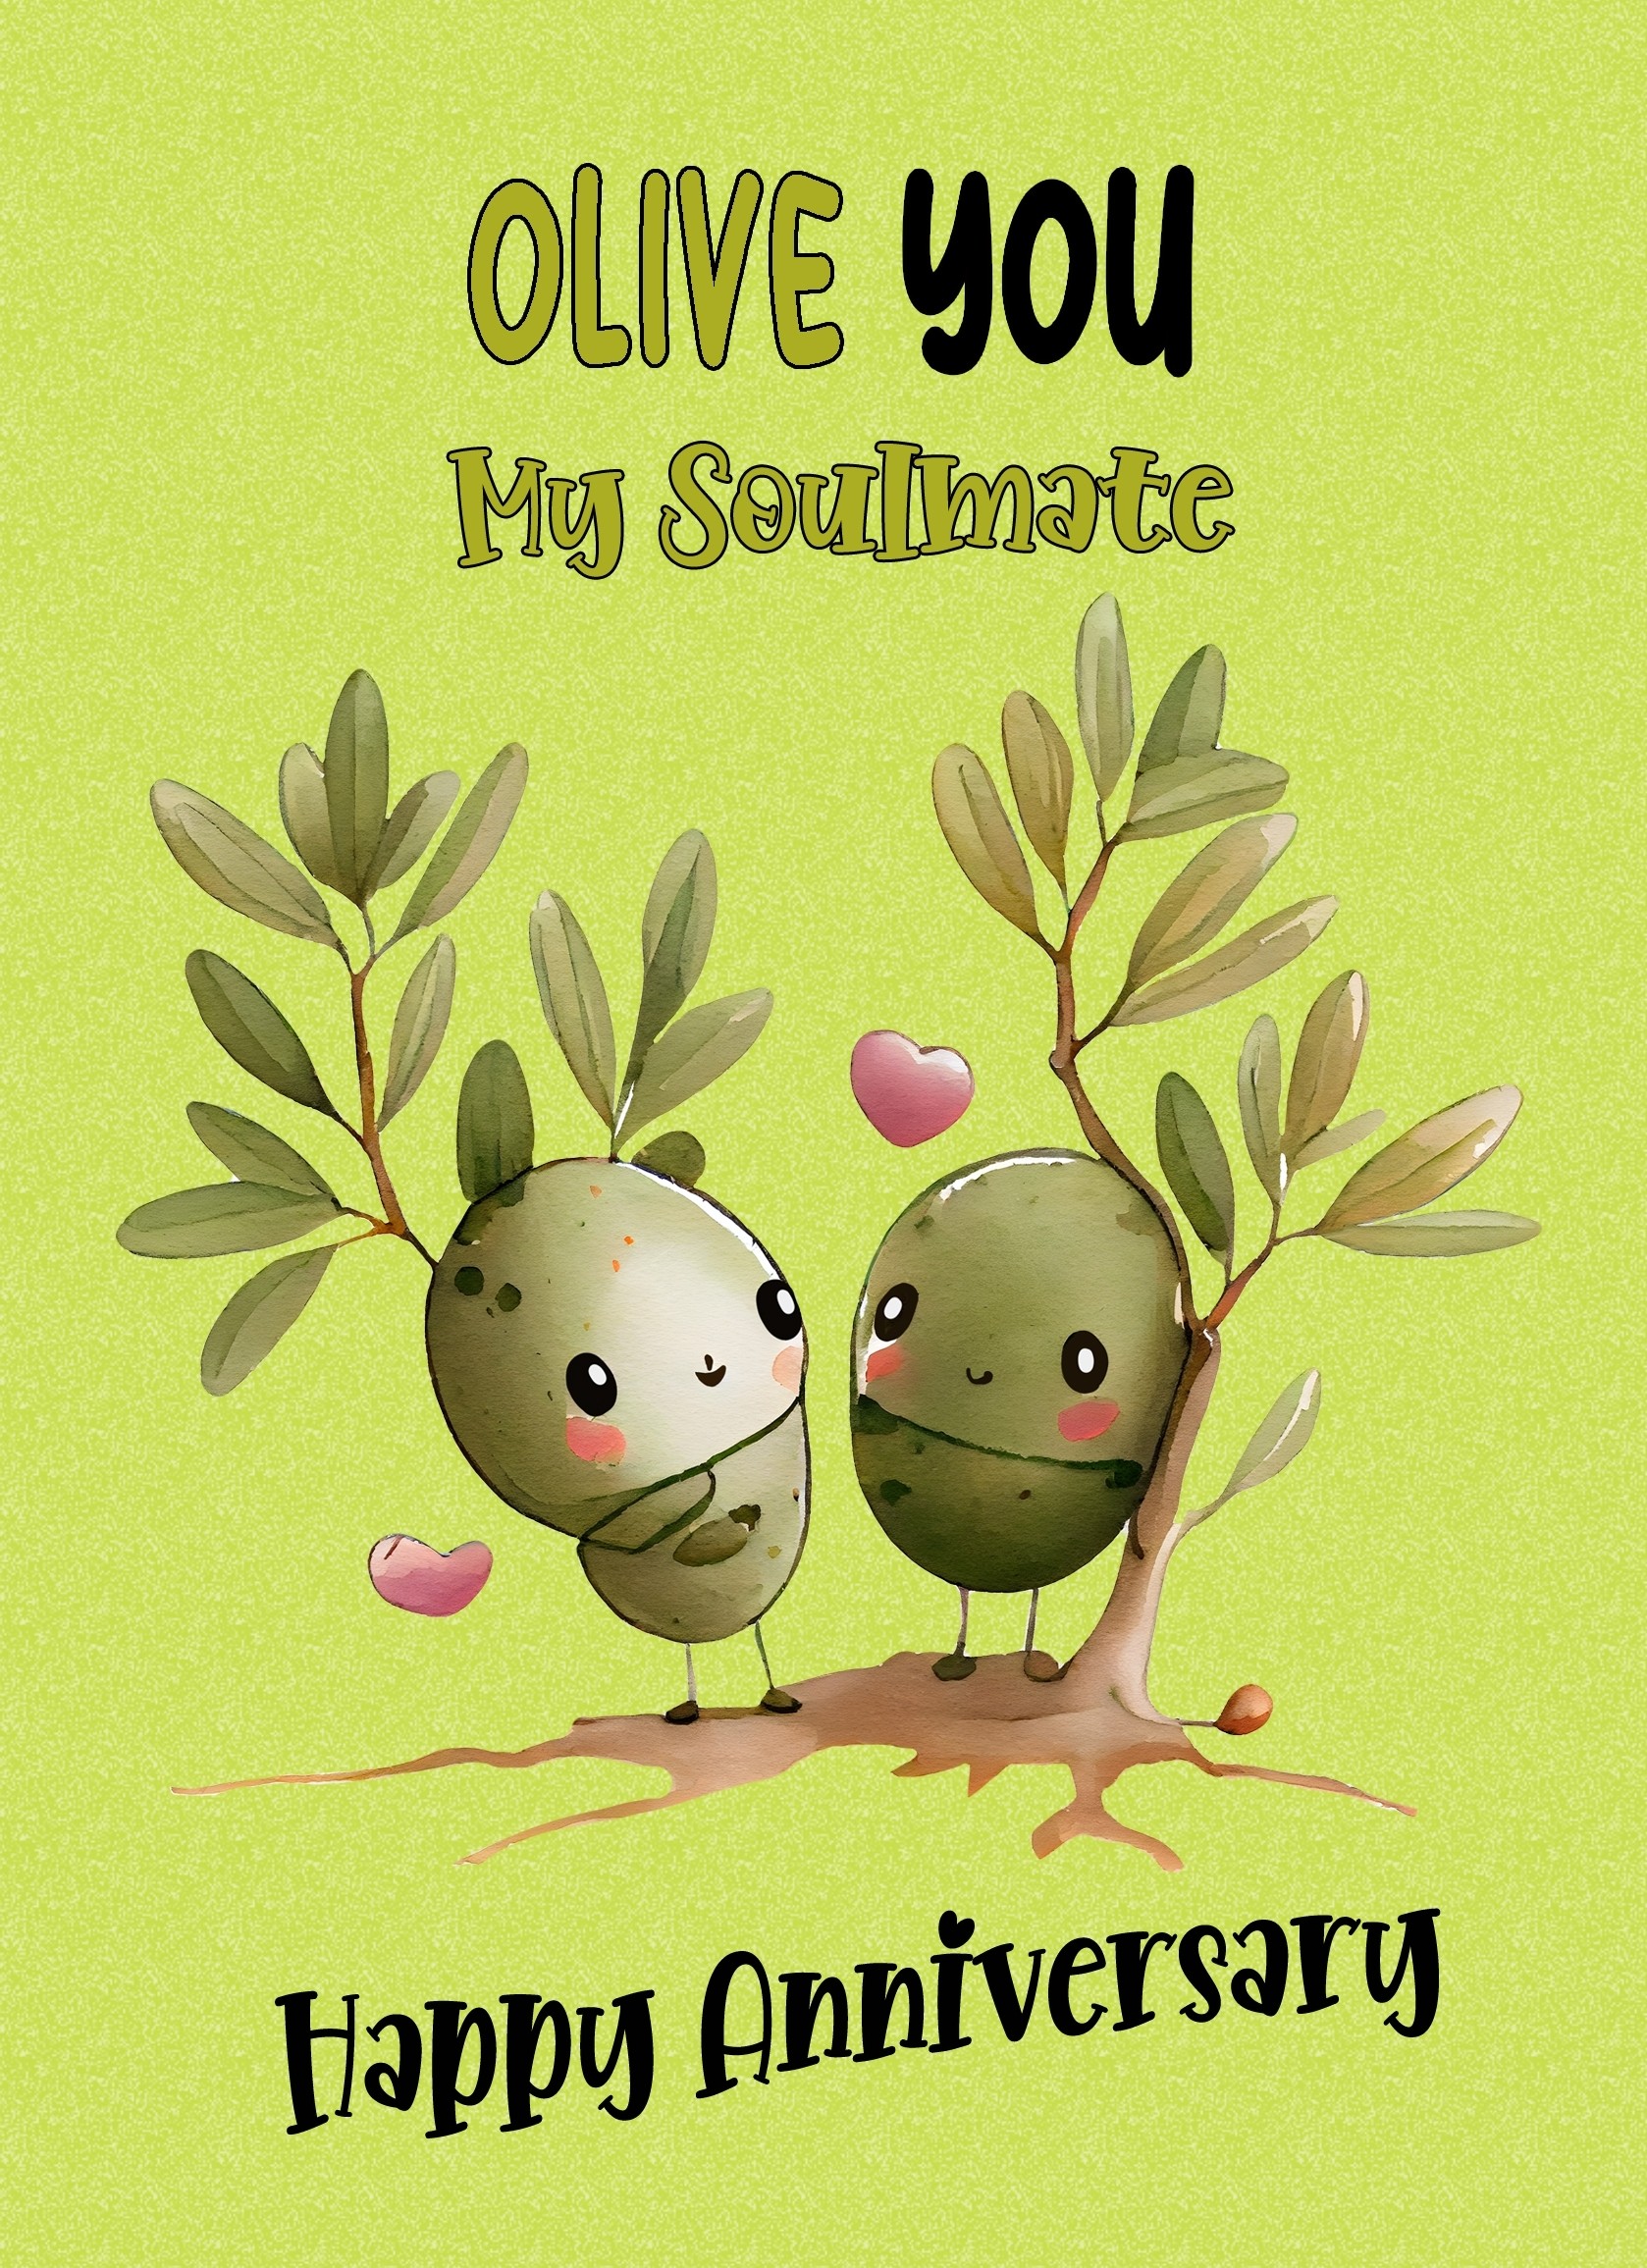 Funny Pun Romantic Anniversary Card for Soulmate (Olive You)